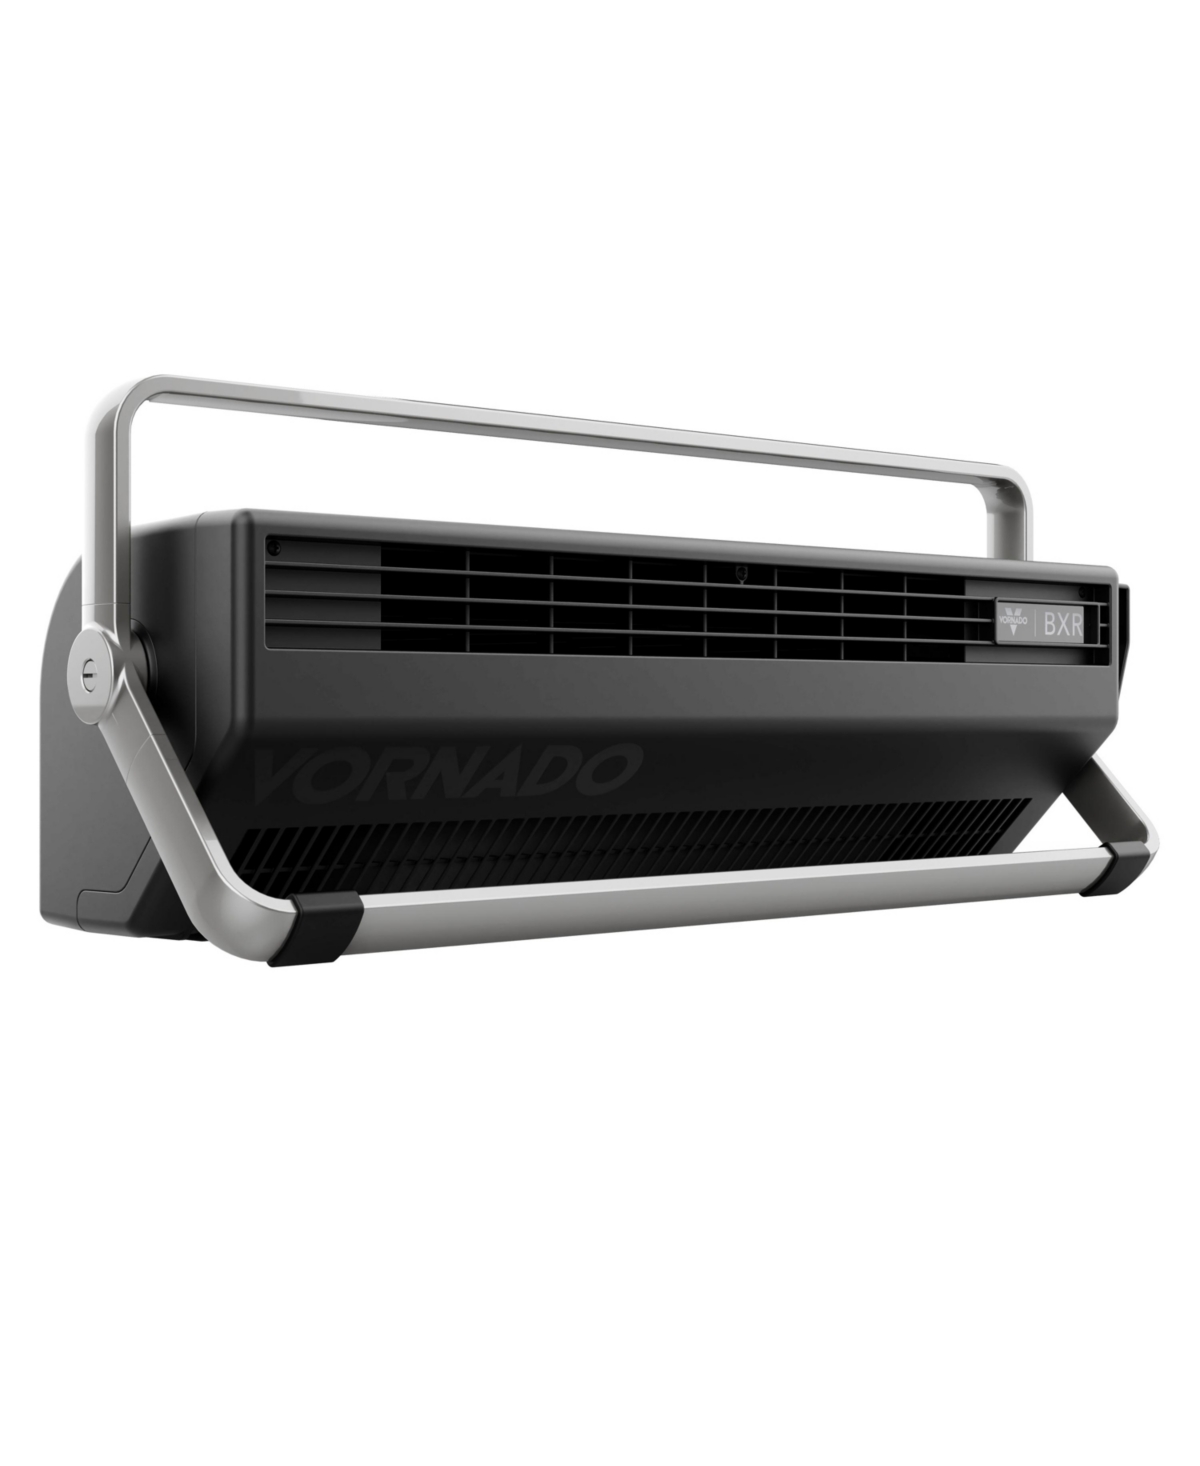 Vornado Bxr Horizontal And Tower Fan, Multi-position And Multidirectional High Velocity Fan With Carry Handl In Black